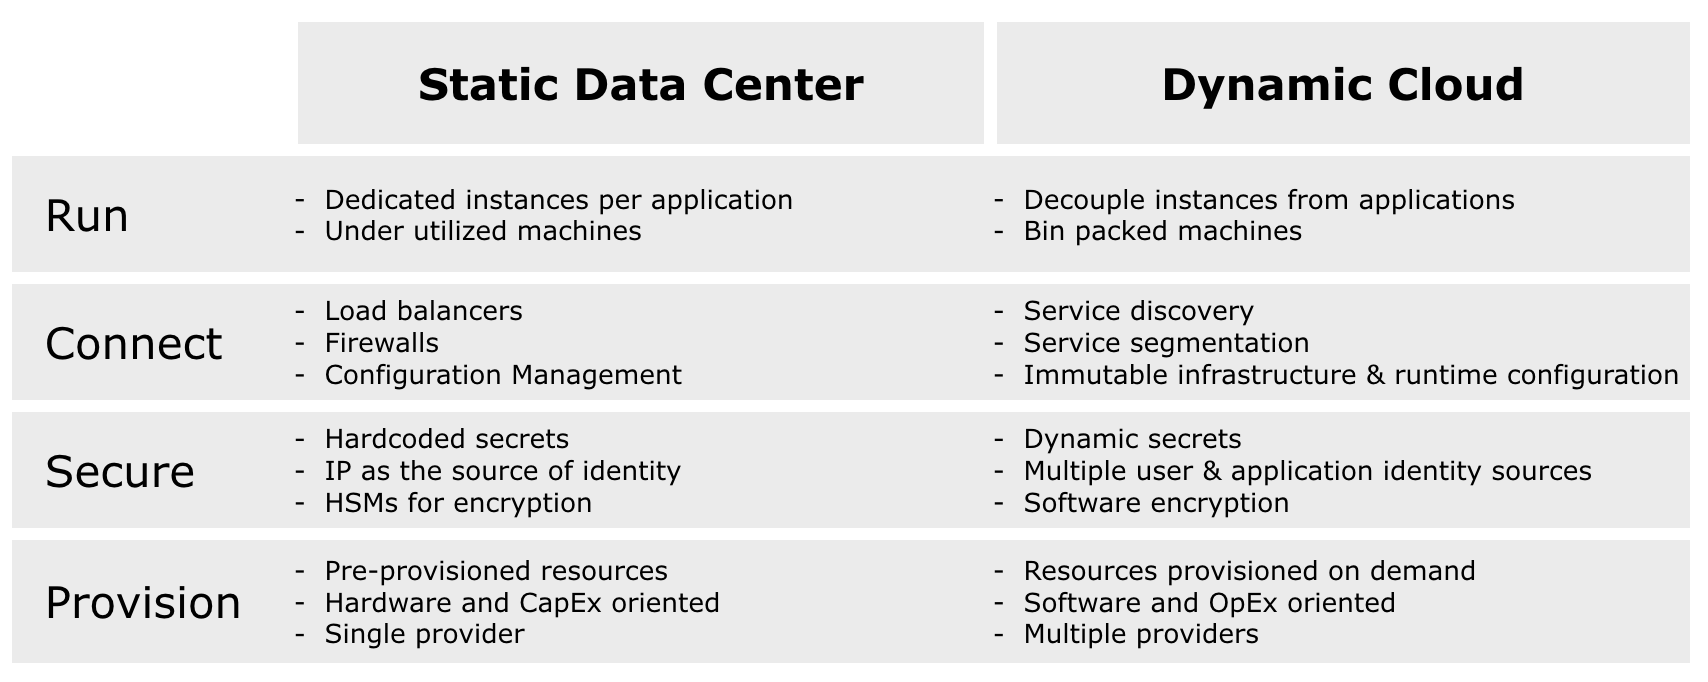 Table comparing static data centers and dynamic clouds